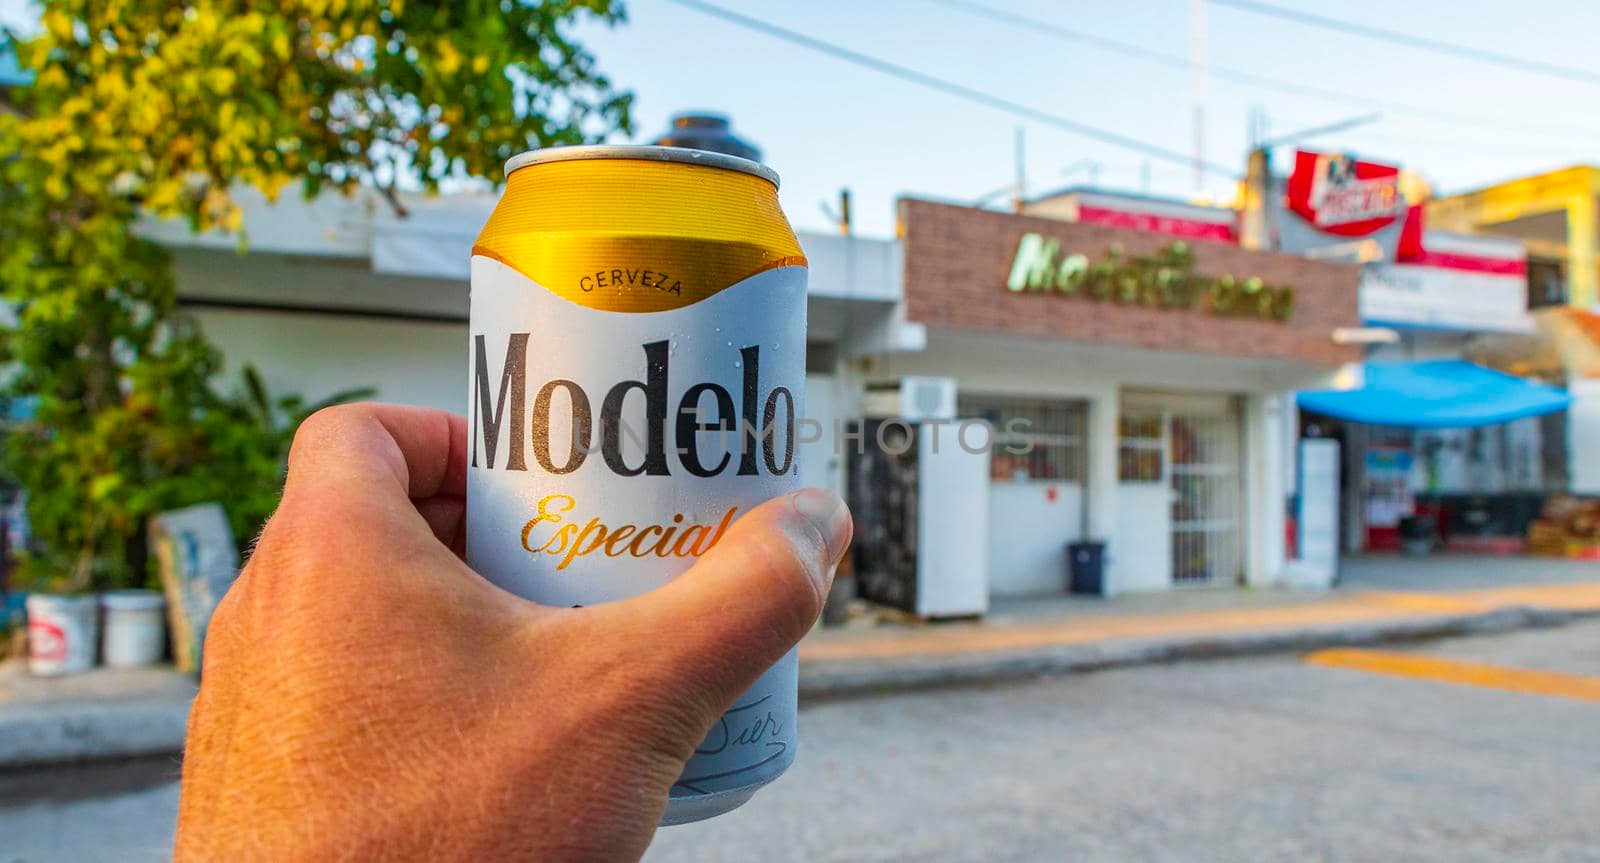 Chemuyil Mexico 02. February 2022 Modelo beer can in the hand with cityscape landscape and store of Chemuyil in Quintana Roo Mexico.